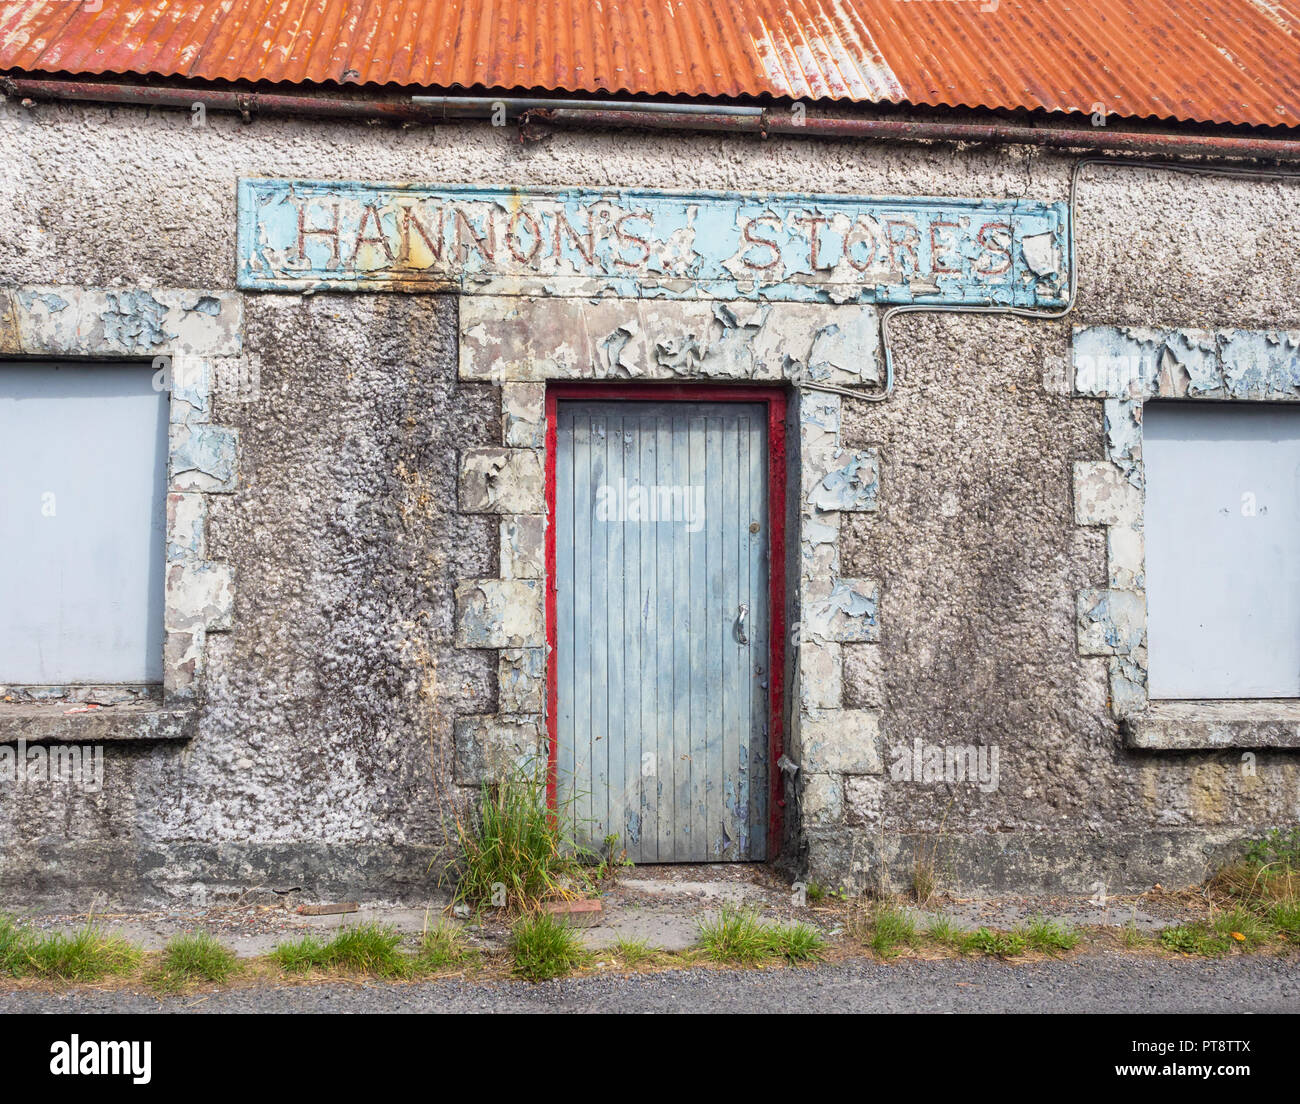 HEADFORD, IRELAND - AUGUST 8, 2018: The abandoned Hannon's Stores building next to a country road near Headford, in County Galway, Ireland. Stock Photo